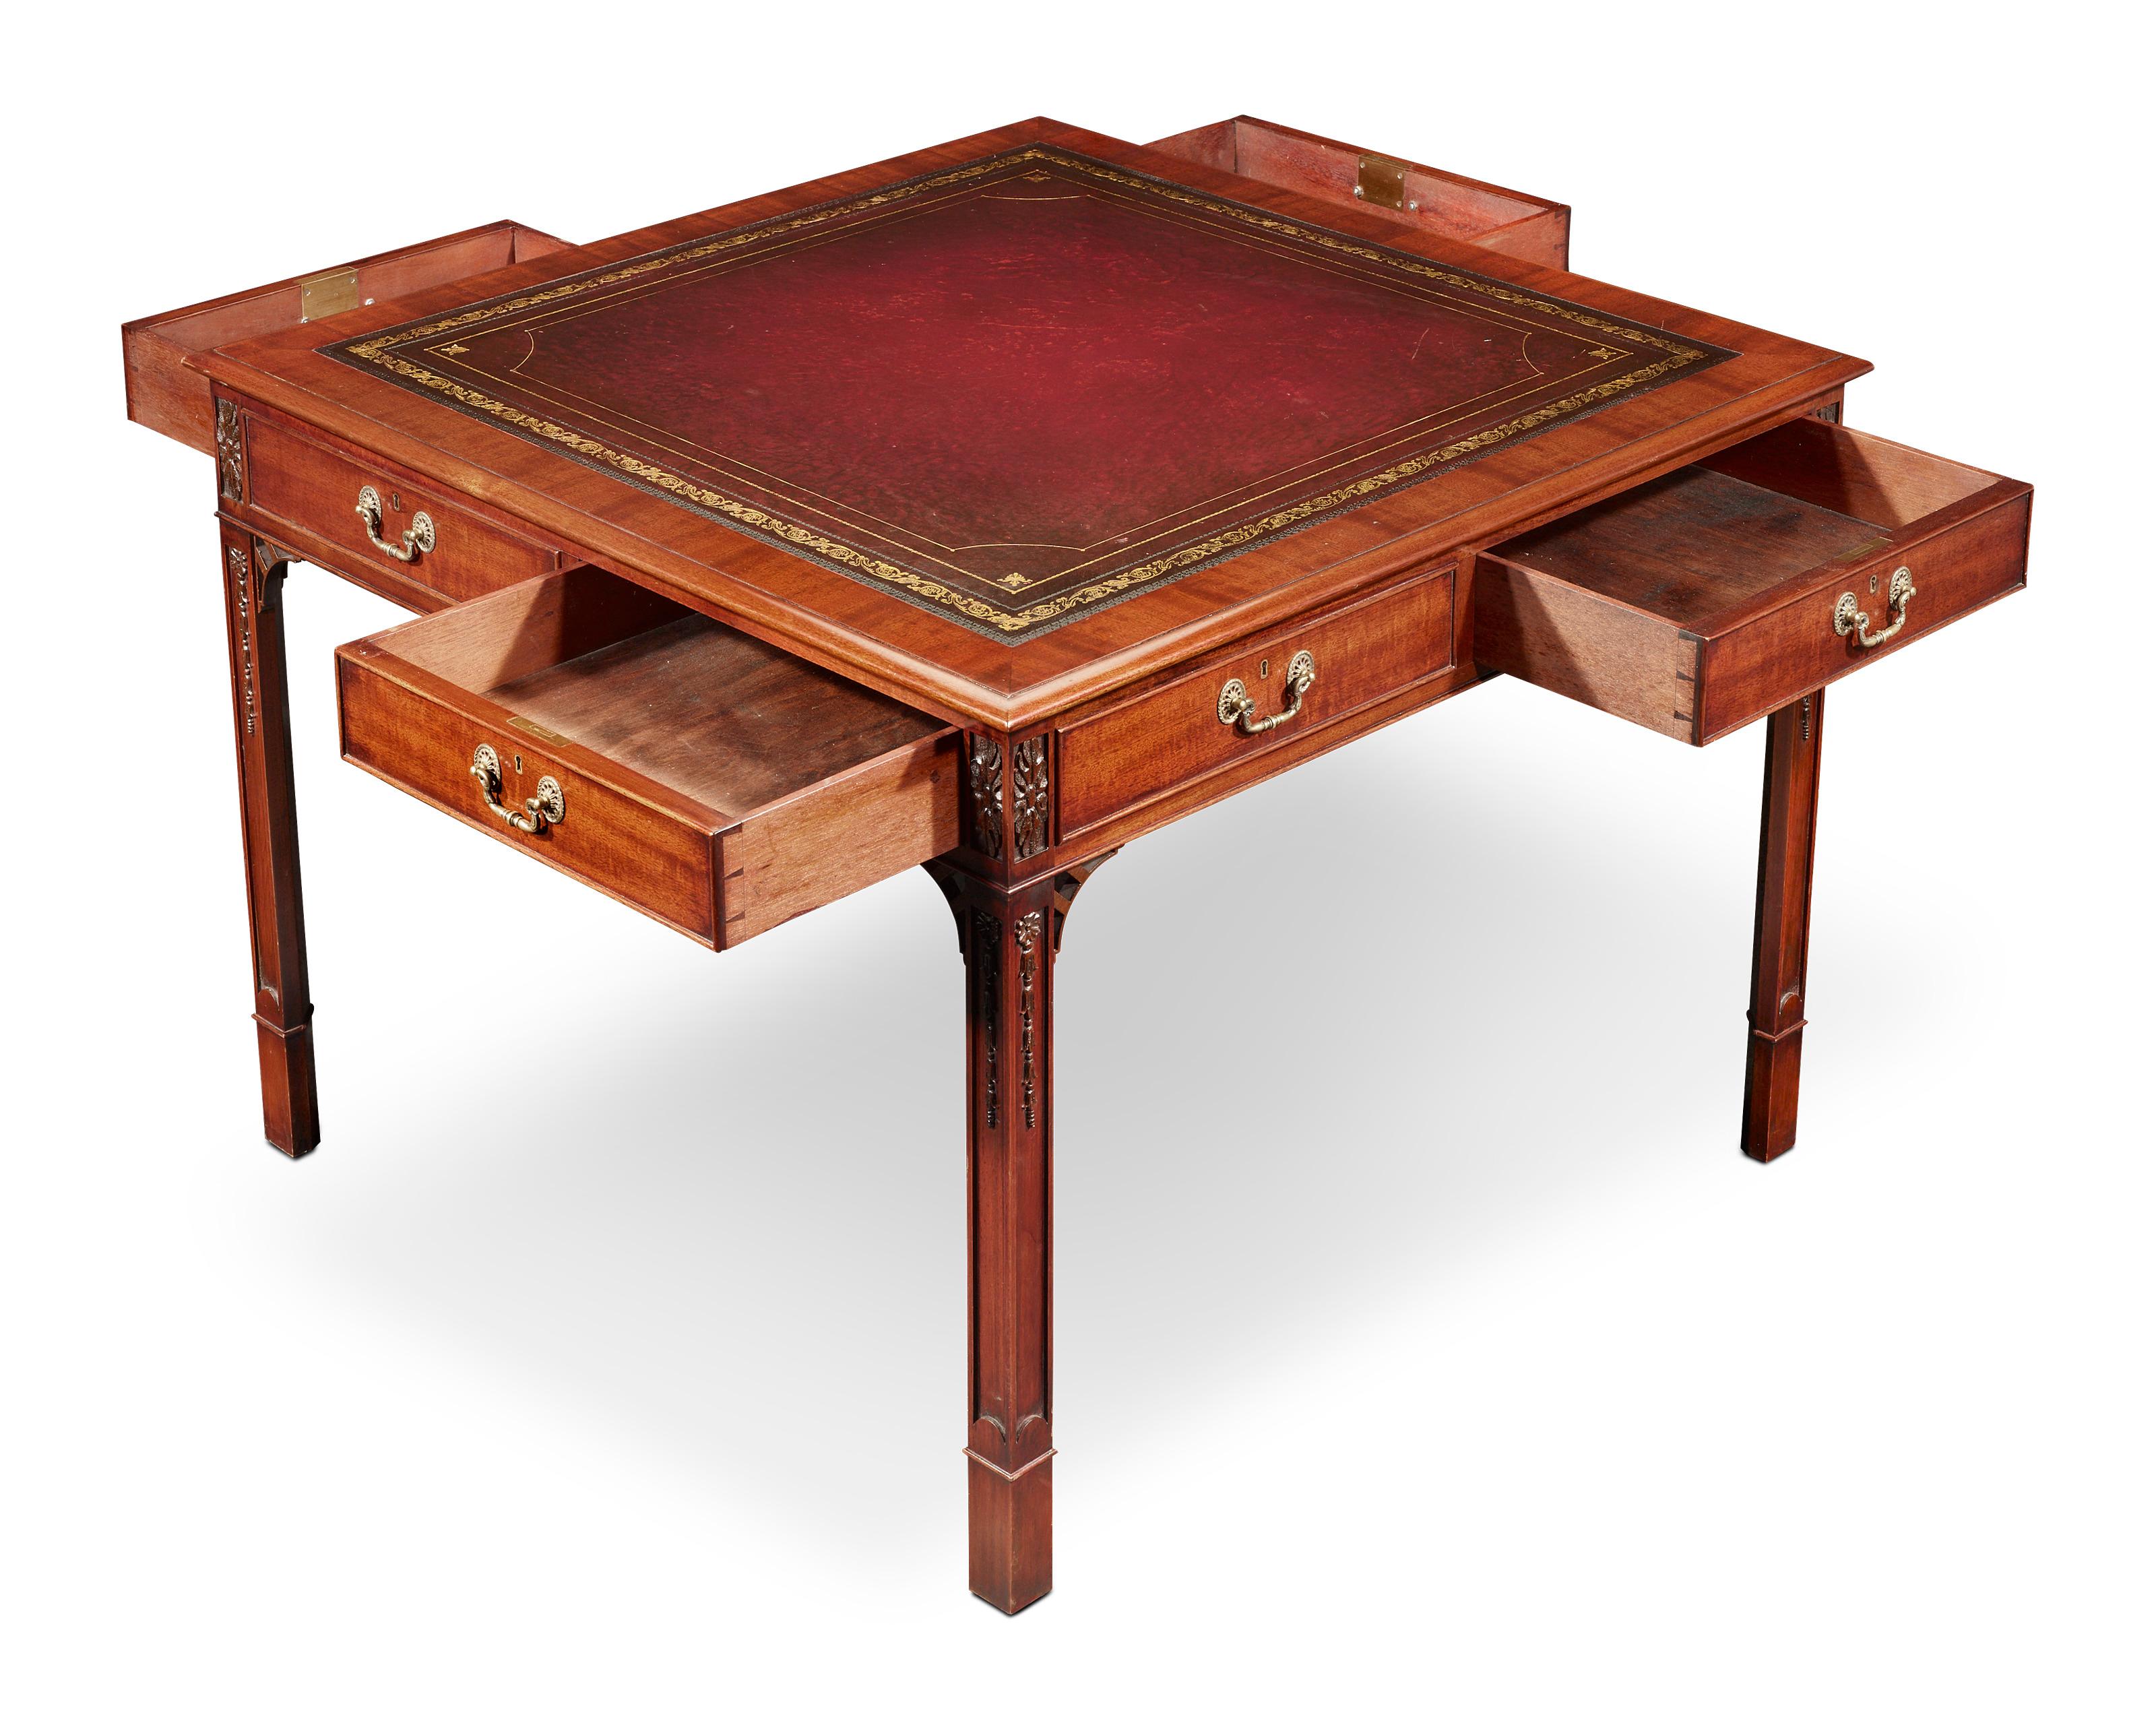 Crafted of rich mahogany, this library table displays all of the sophistication Regency-era furnishings are known for. This table features a straightforward design with beautifully carved details on the legs and frieze. A tooled and gilded red